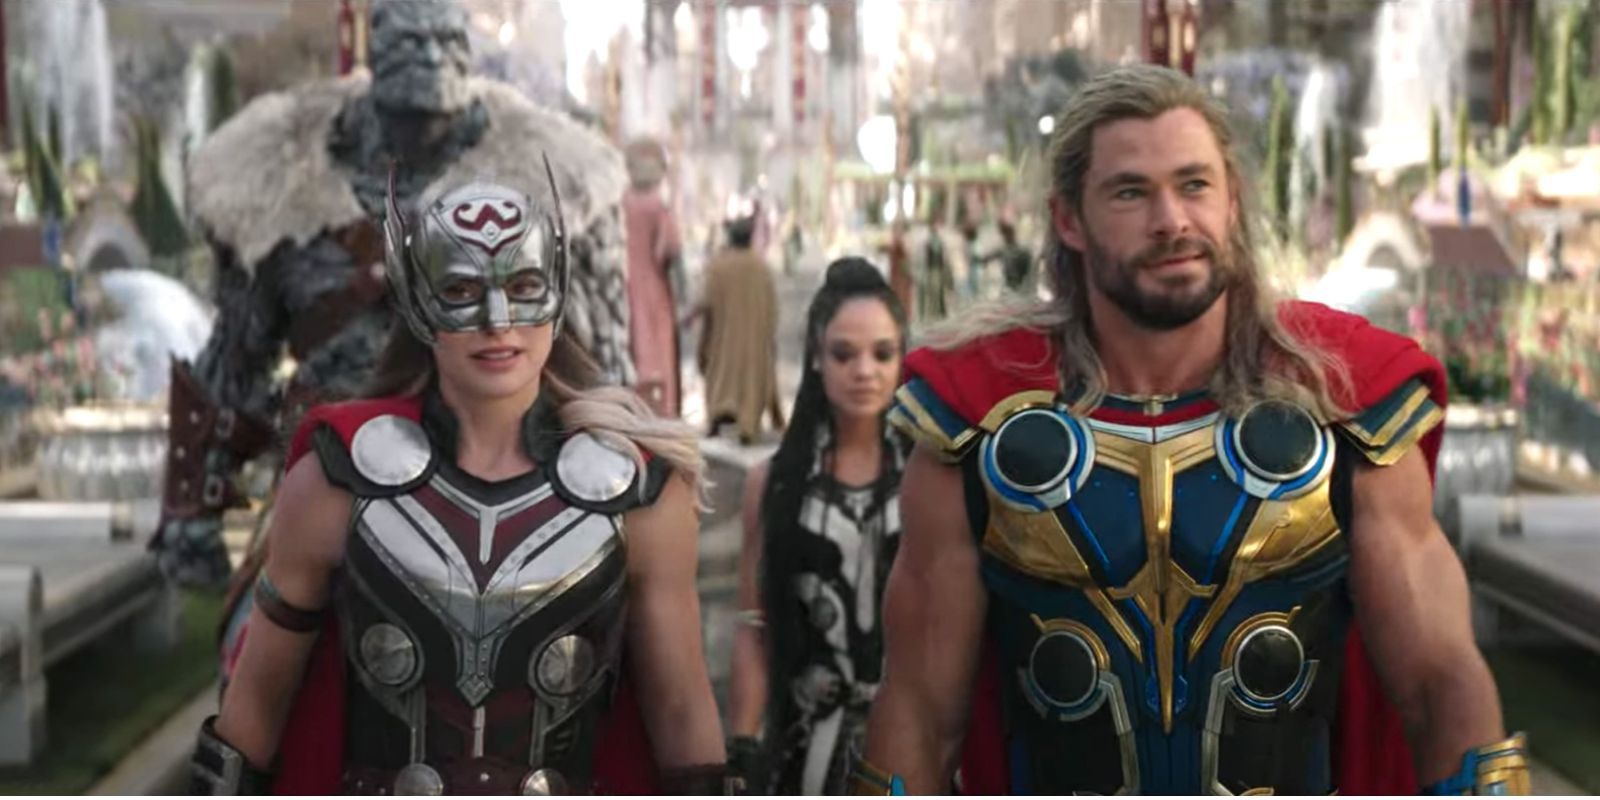 Jane, Thor, Valkyrie and Korg walking together